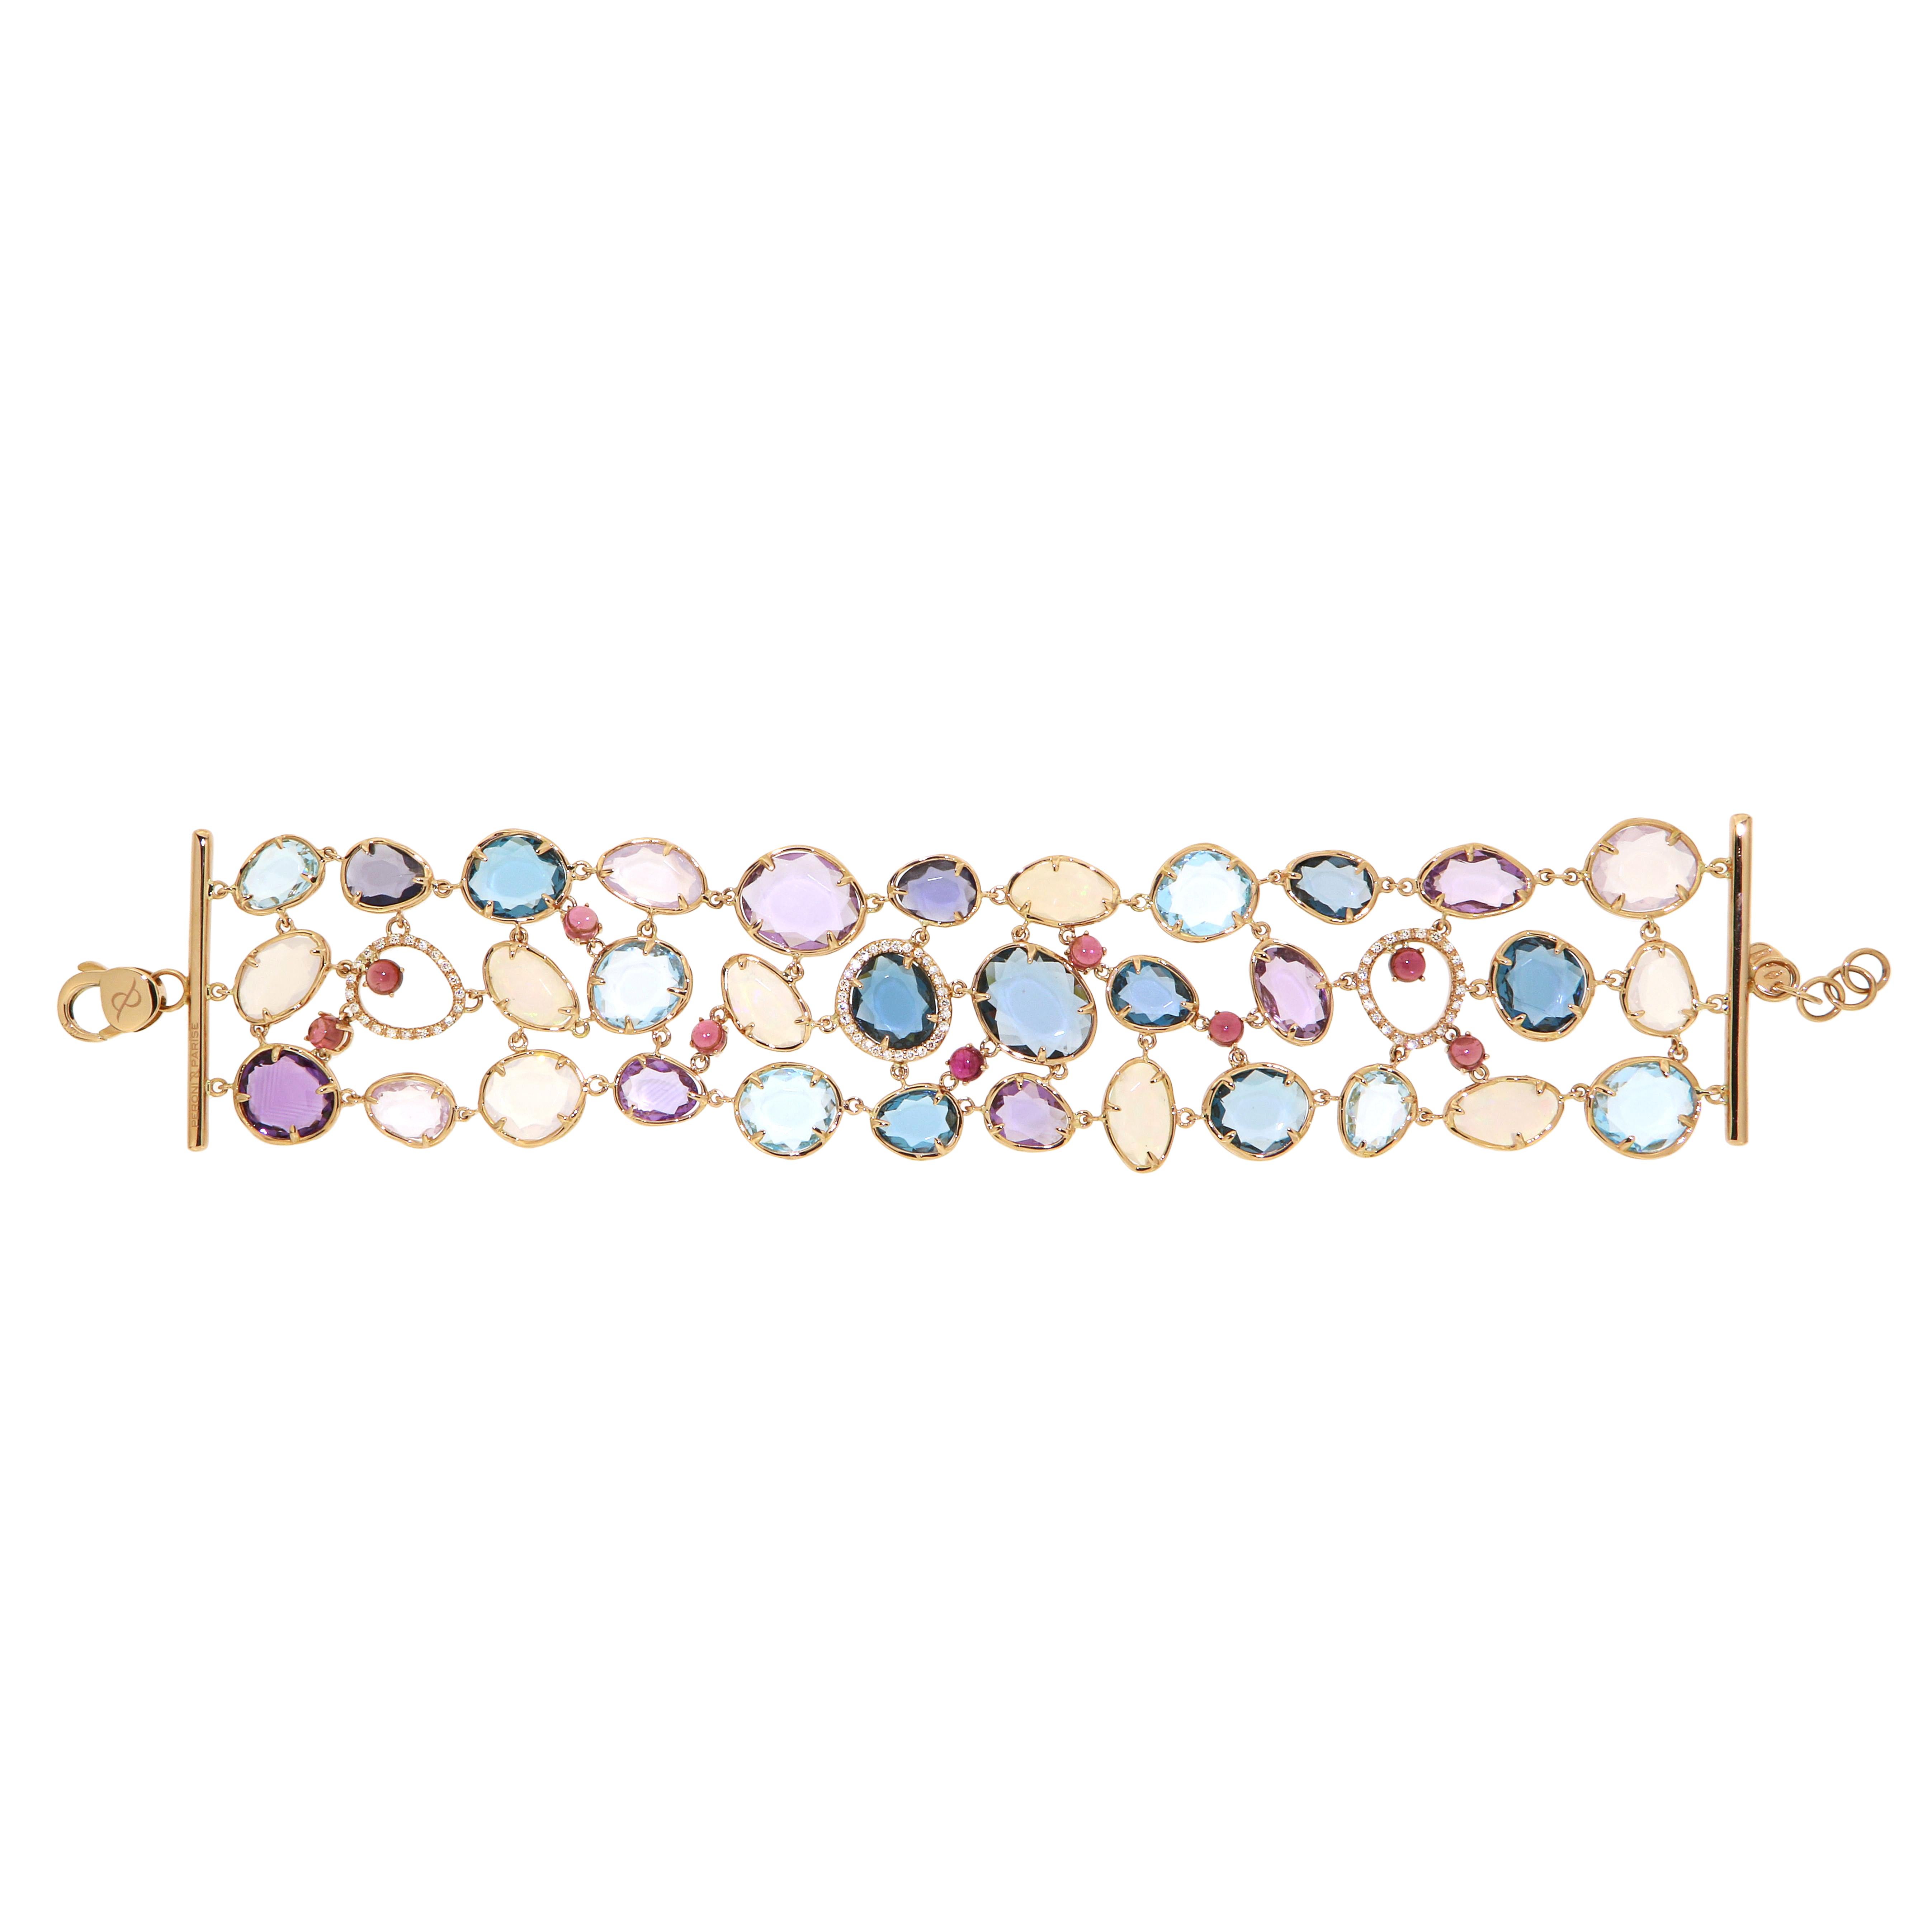 Bracelet Rose 18K Gold 

Diamond 0,99 ct
Pink Tourmaline
Amethyst
London blue topaz
Sky blue topaz 
Opal
Sunflower Quartz, Lilac Quartz 
Pink Tourmaline

Size 21
Weight 47

It is our honour to create fine jewelry, and it’s for that reason that we